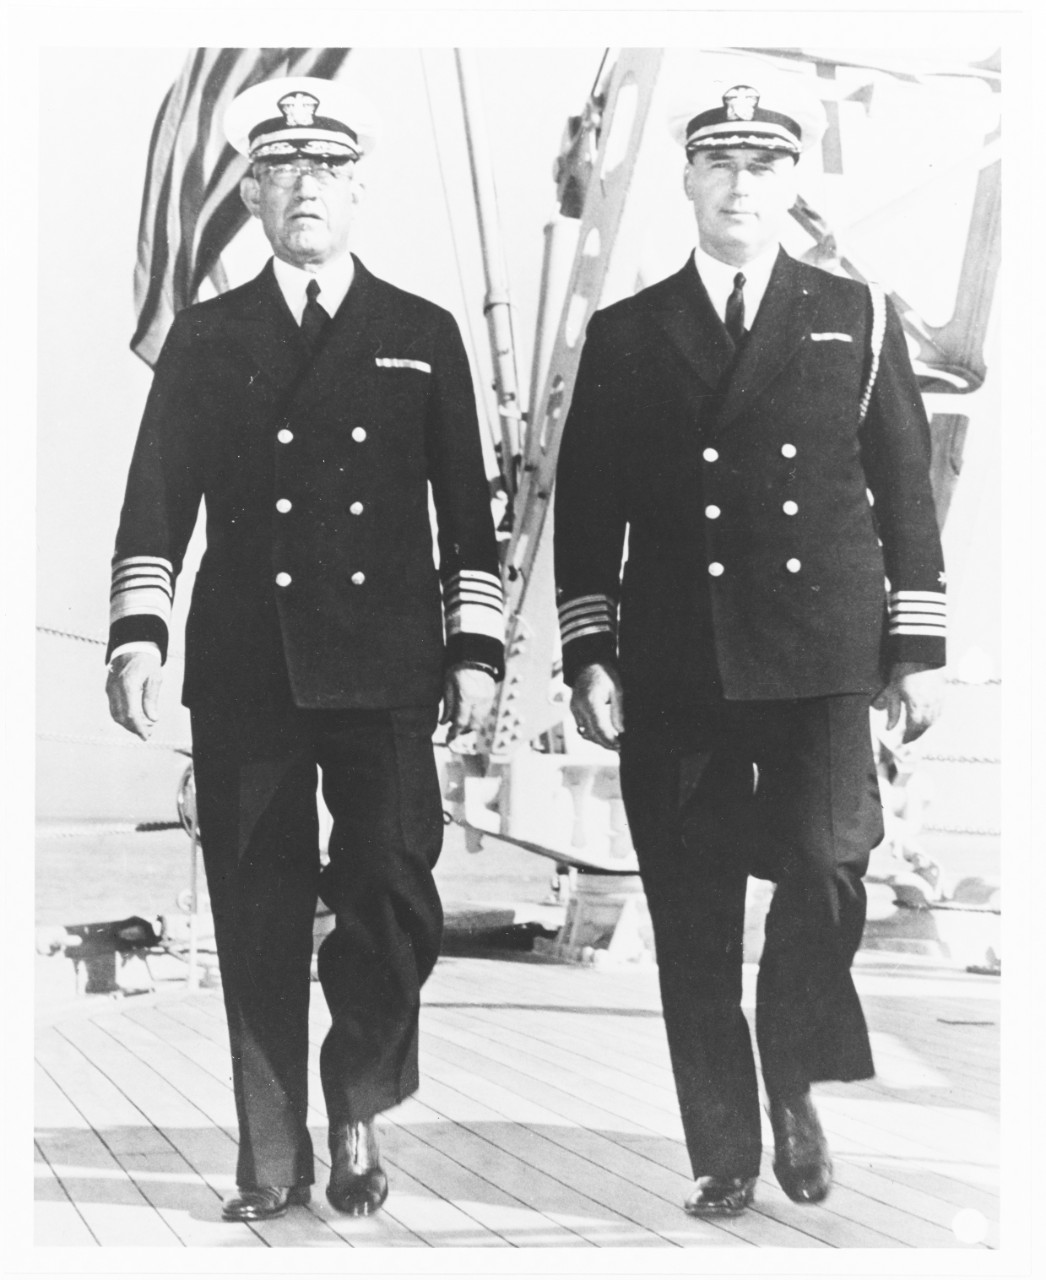 Admiral James O. Richardson, Commander-in-Chief, U.S. Fleet, with Captain S.O. Taffinder, Chief of Staff, on board his flagship.